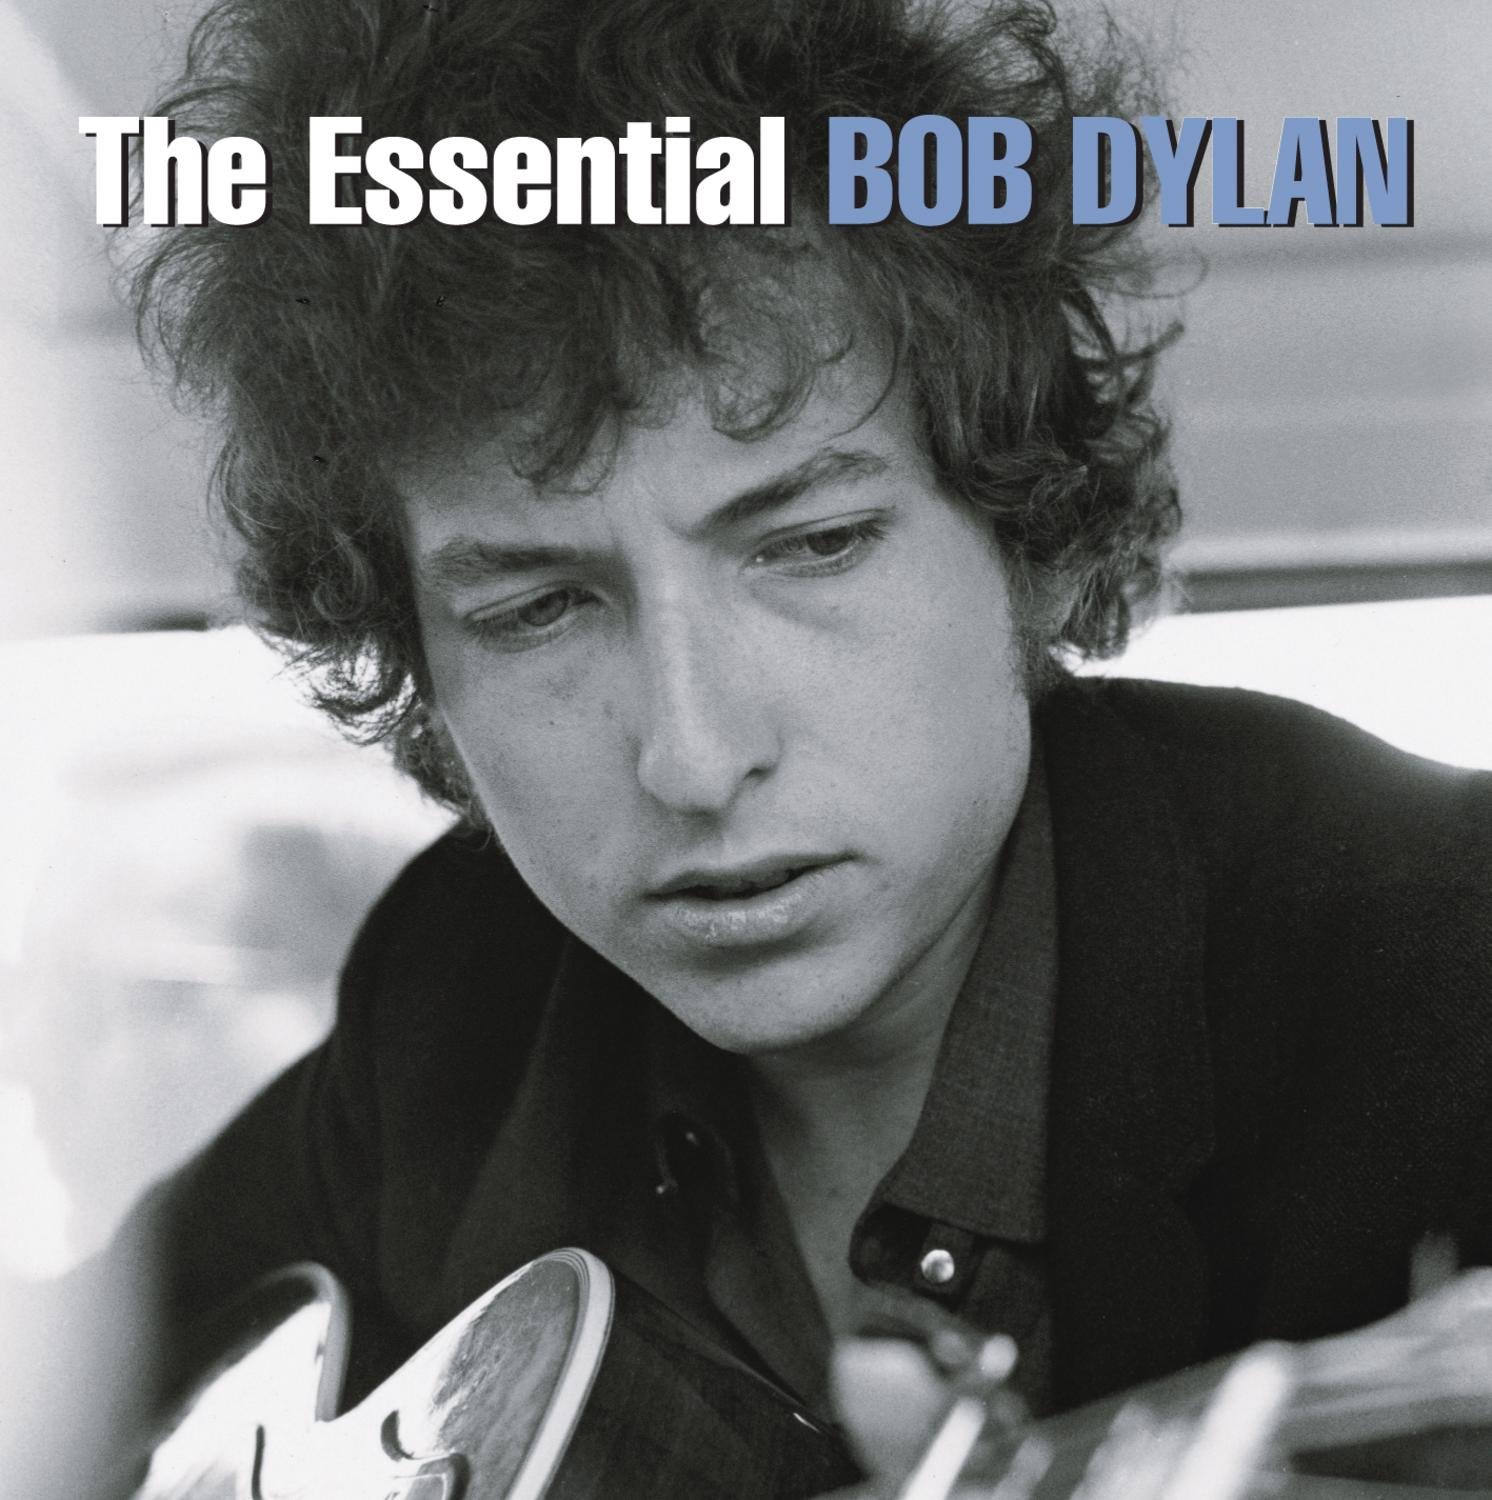 THE ESSENTIAL BOB DYLAN on MovieShack